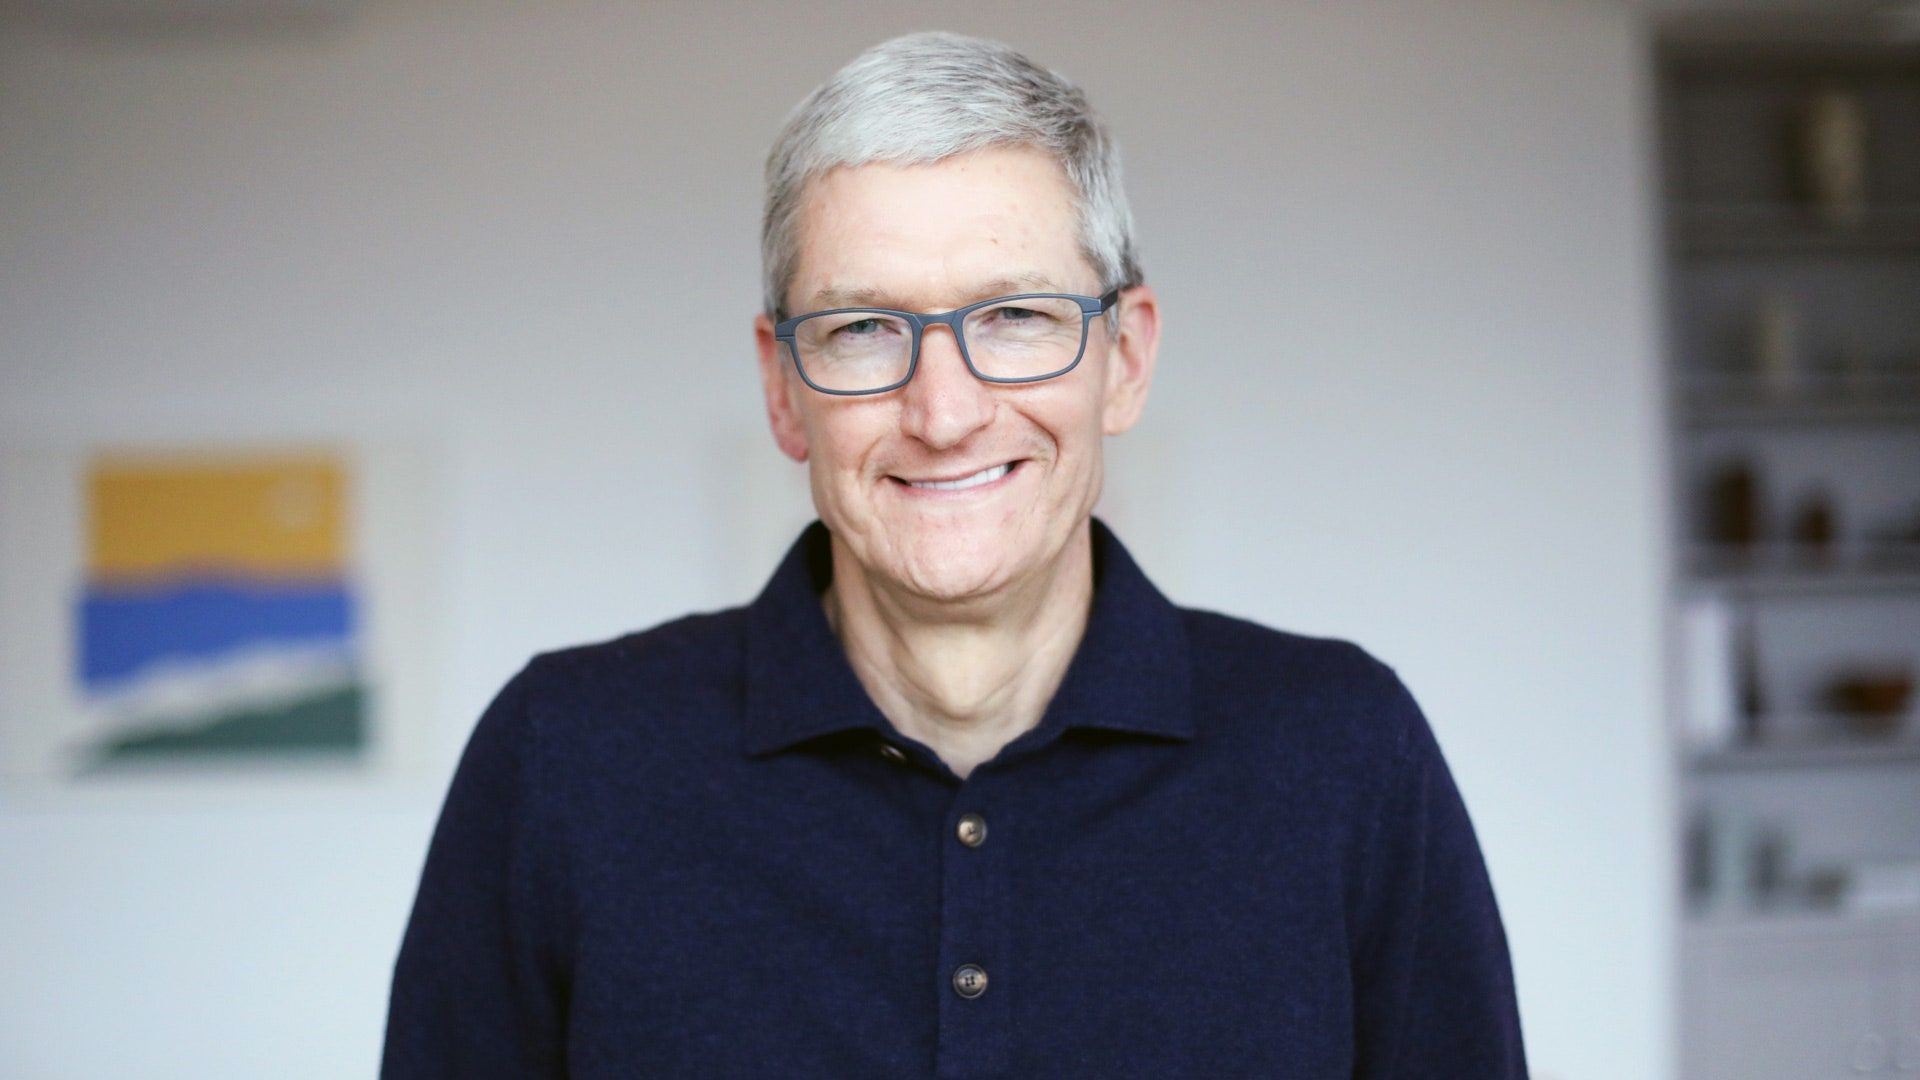 Apple CEO Tim Cook on the future of fashion and augmented reality